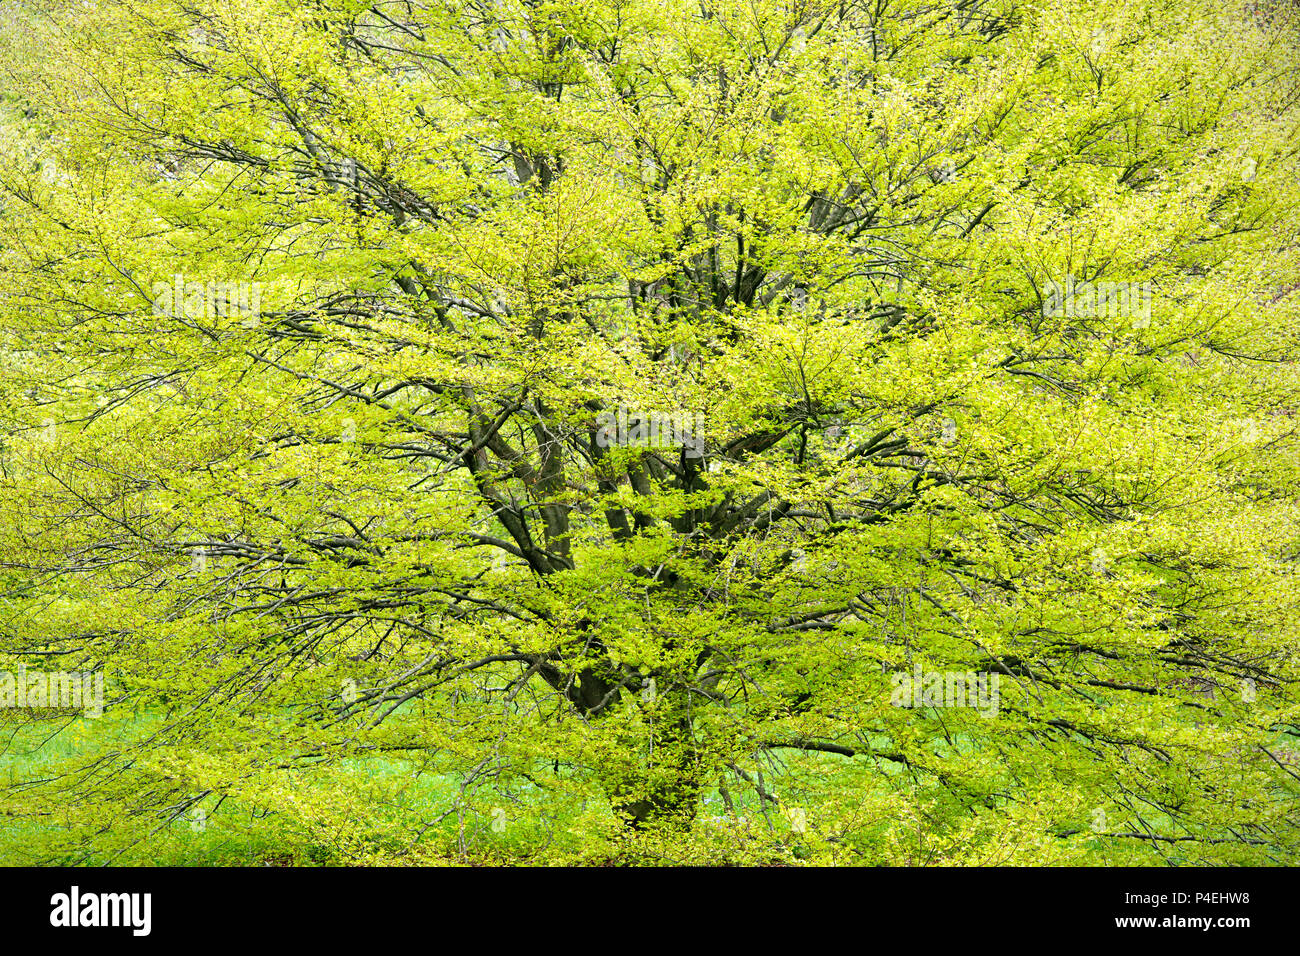 A beech tree explodes in new spring green foliage at The Morton Arboretum in Lisle, Illinois. Stock Photo